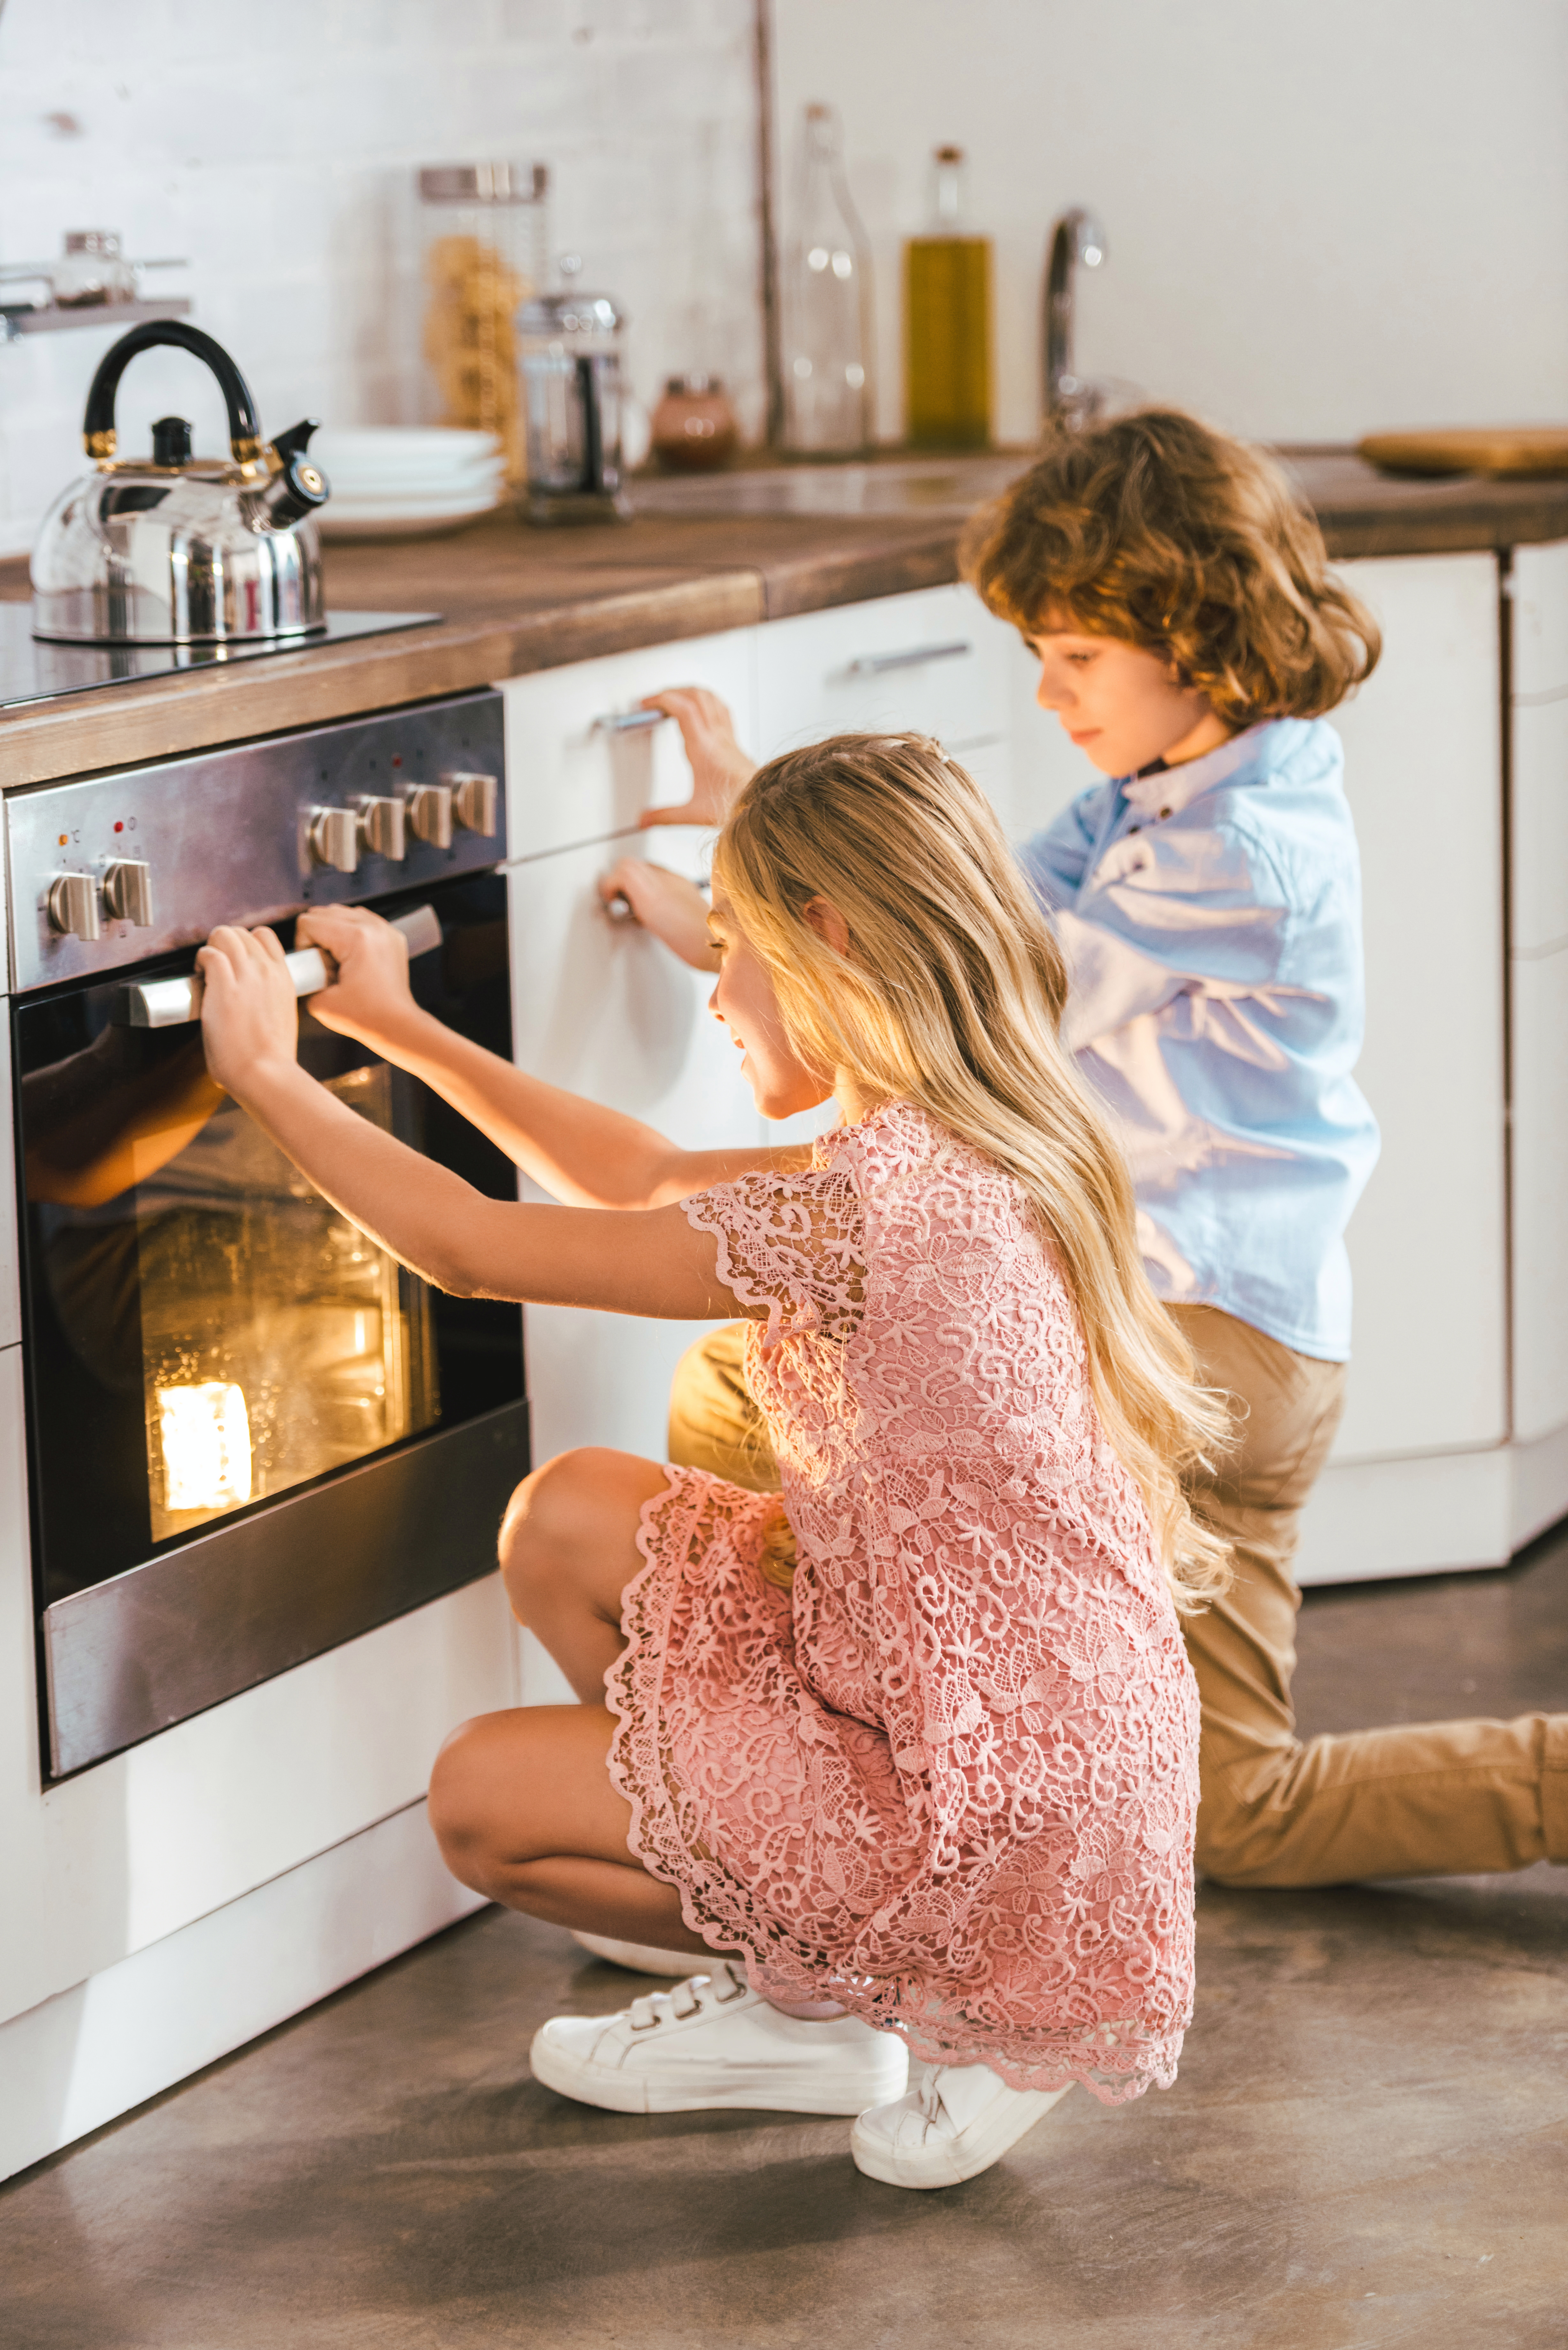 kids-pretend-cooking-floor-heating-under-cabinets-page